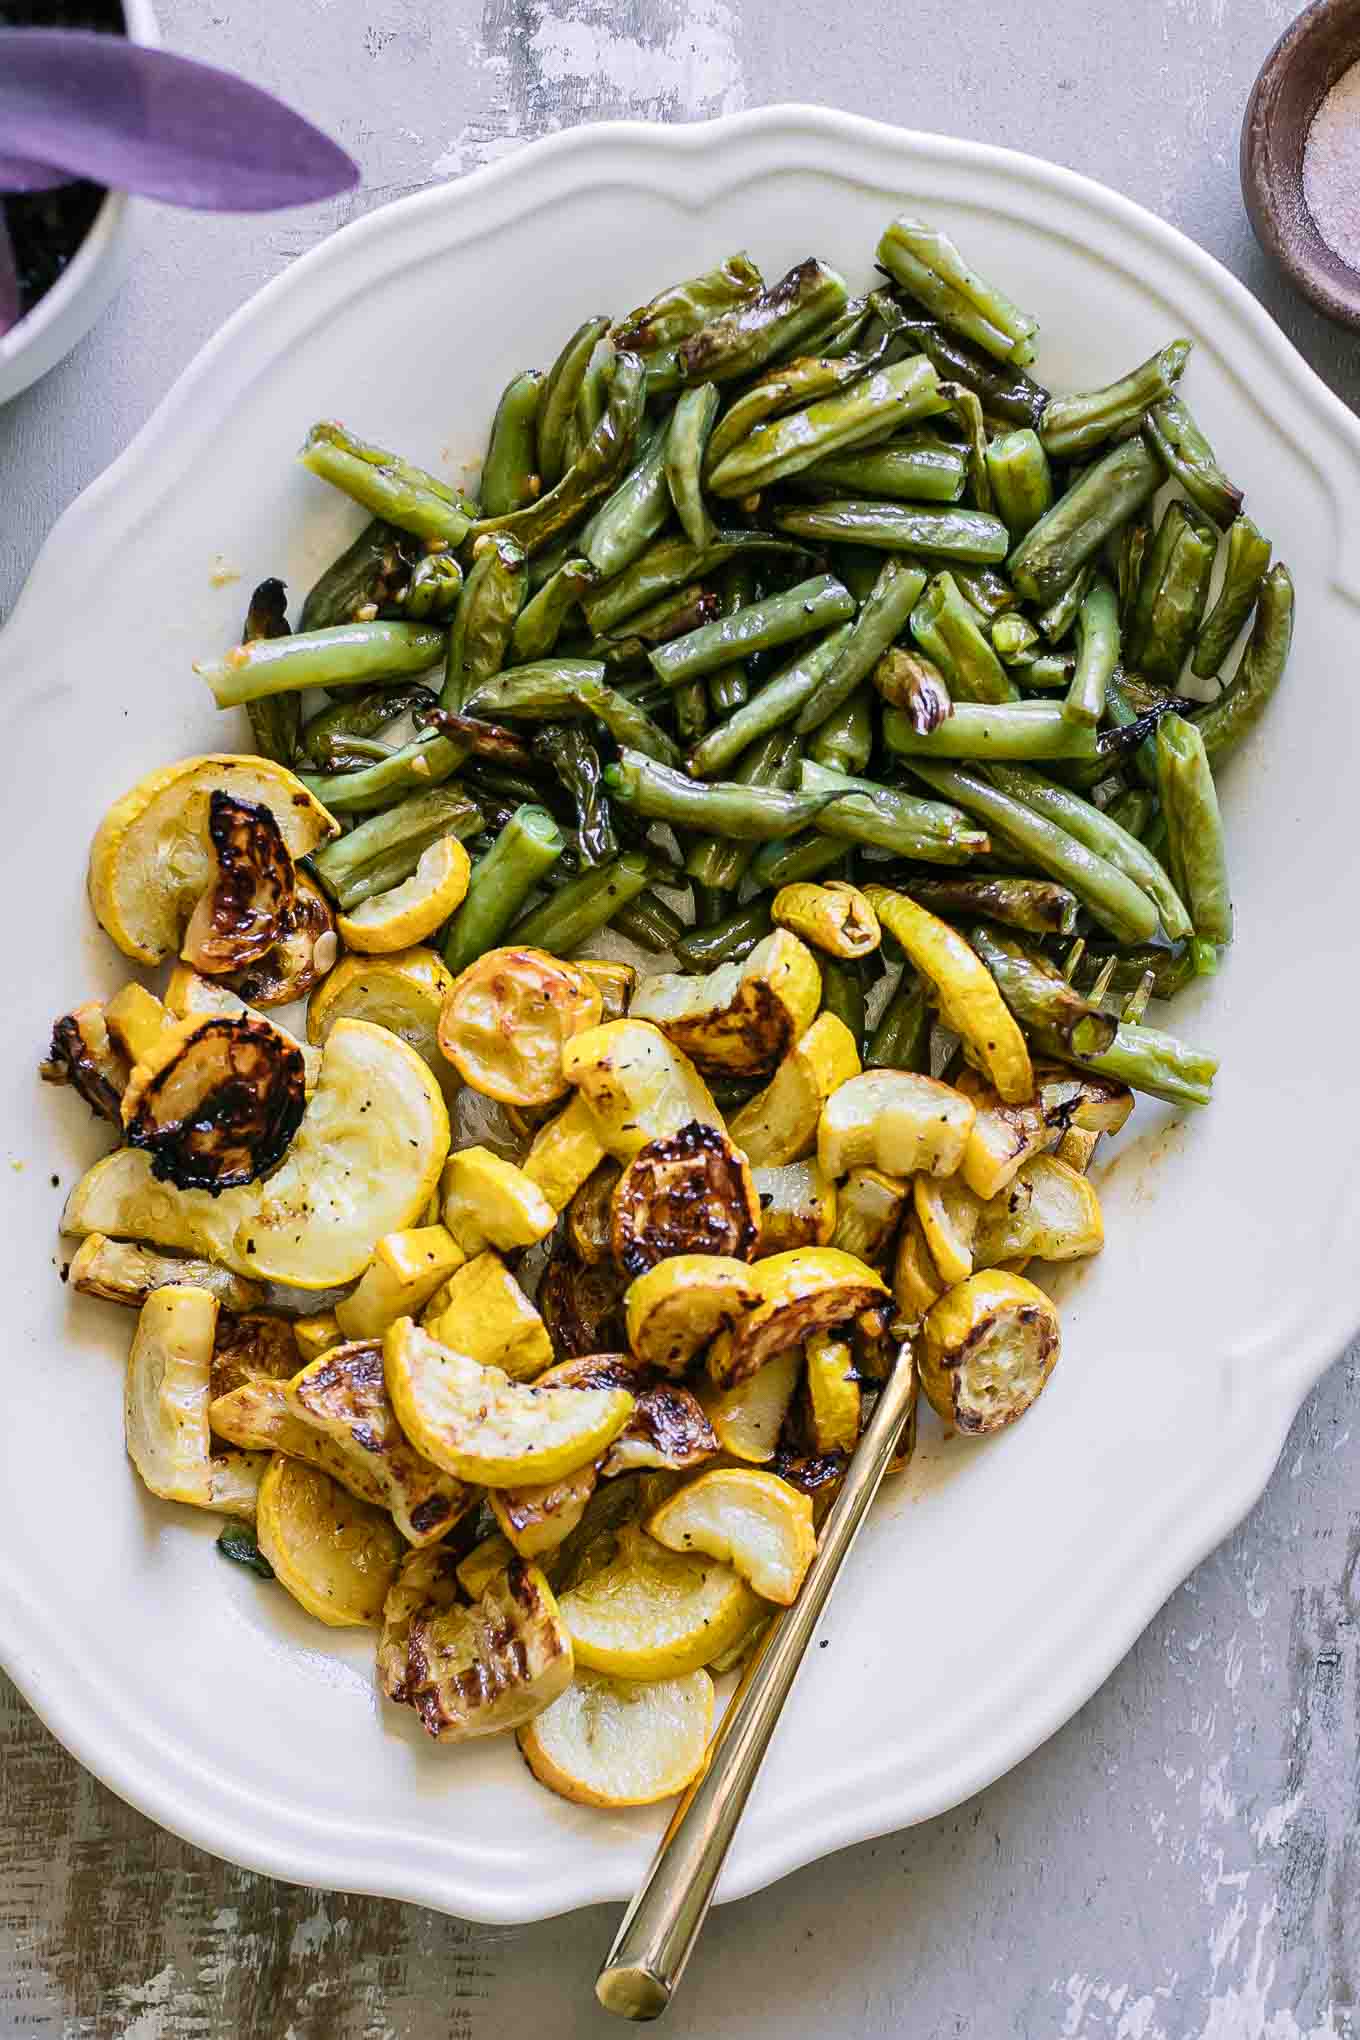 Roasted Squash and Green Beans